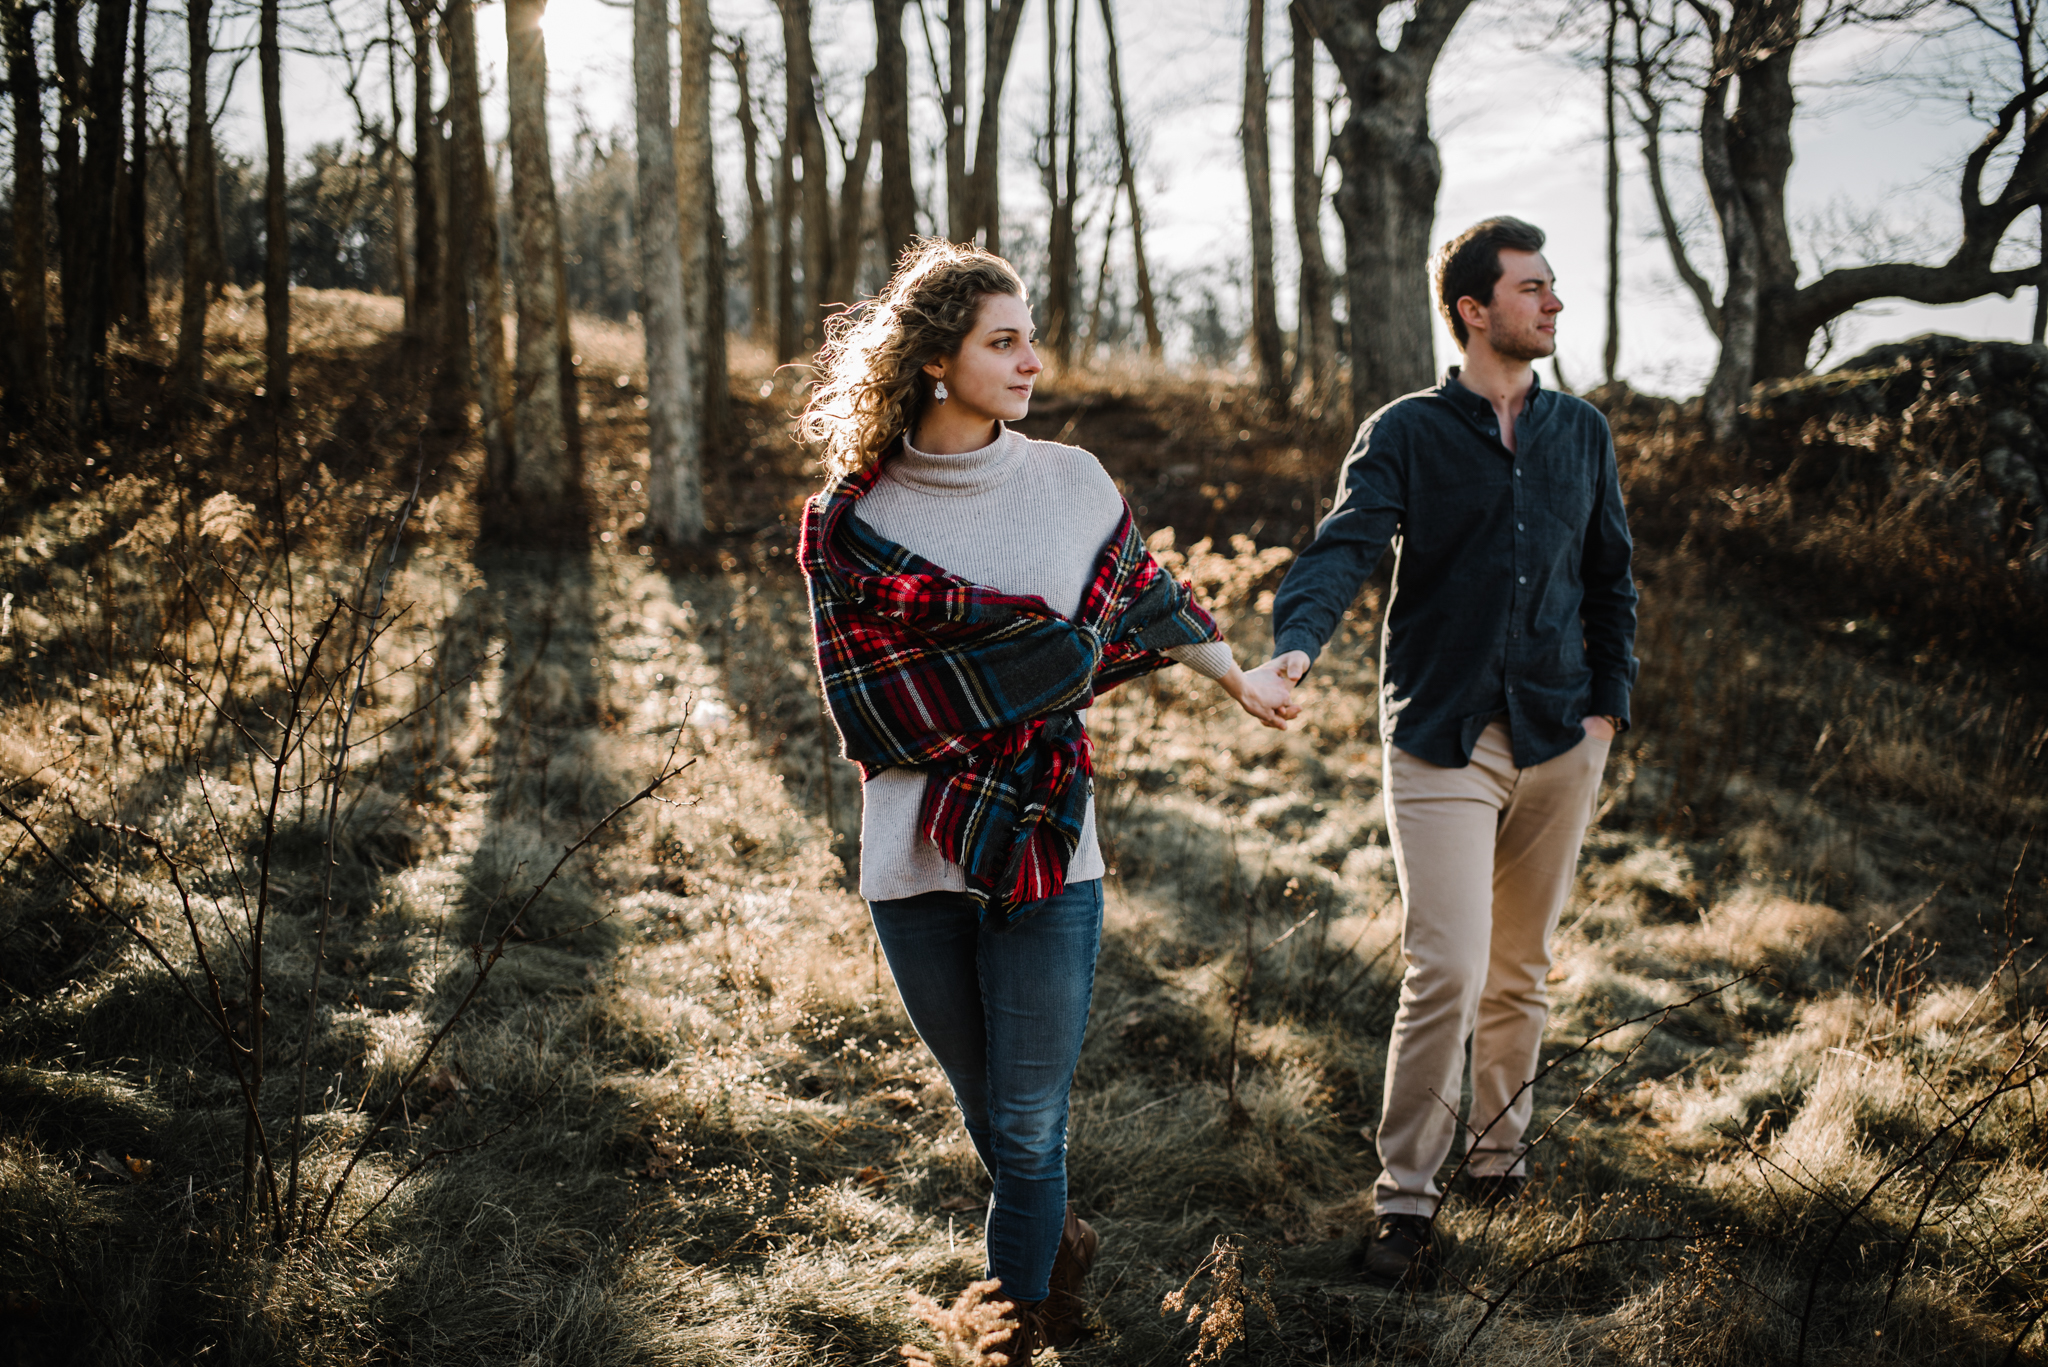 Alli and Mitchell - Shenandoah National Park Adventure Winter Engagement Session on Skyline Drive - White Sails Creative Elopement Photography_32.JPG